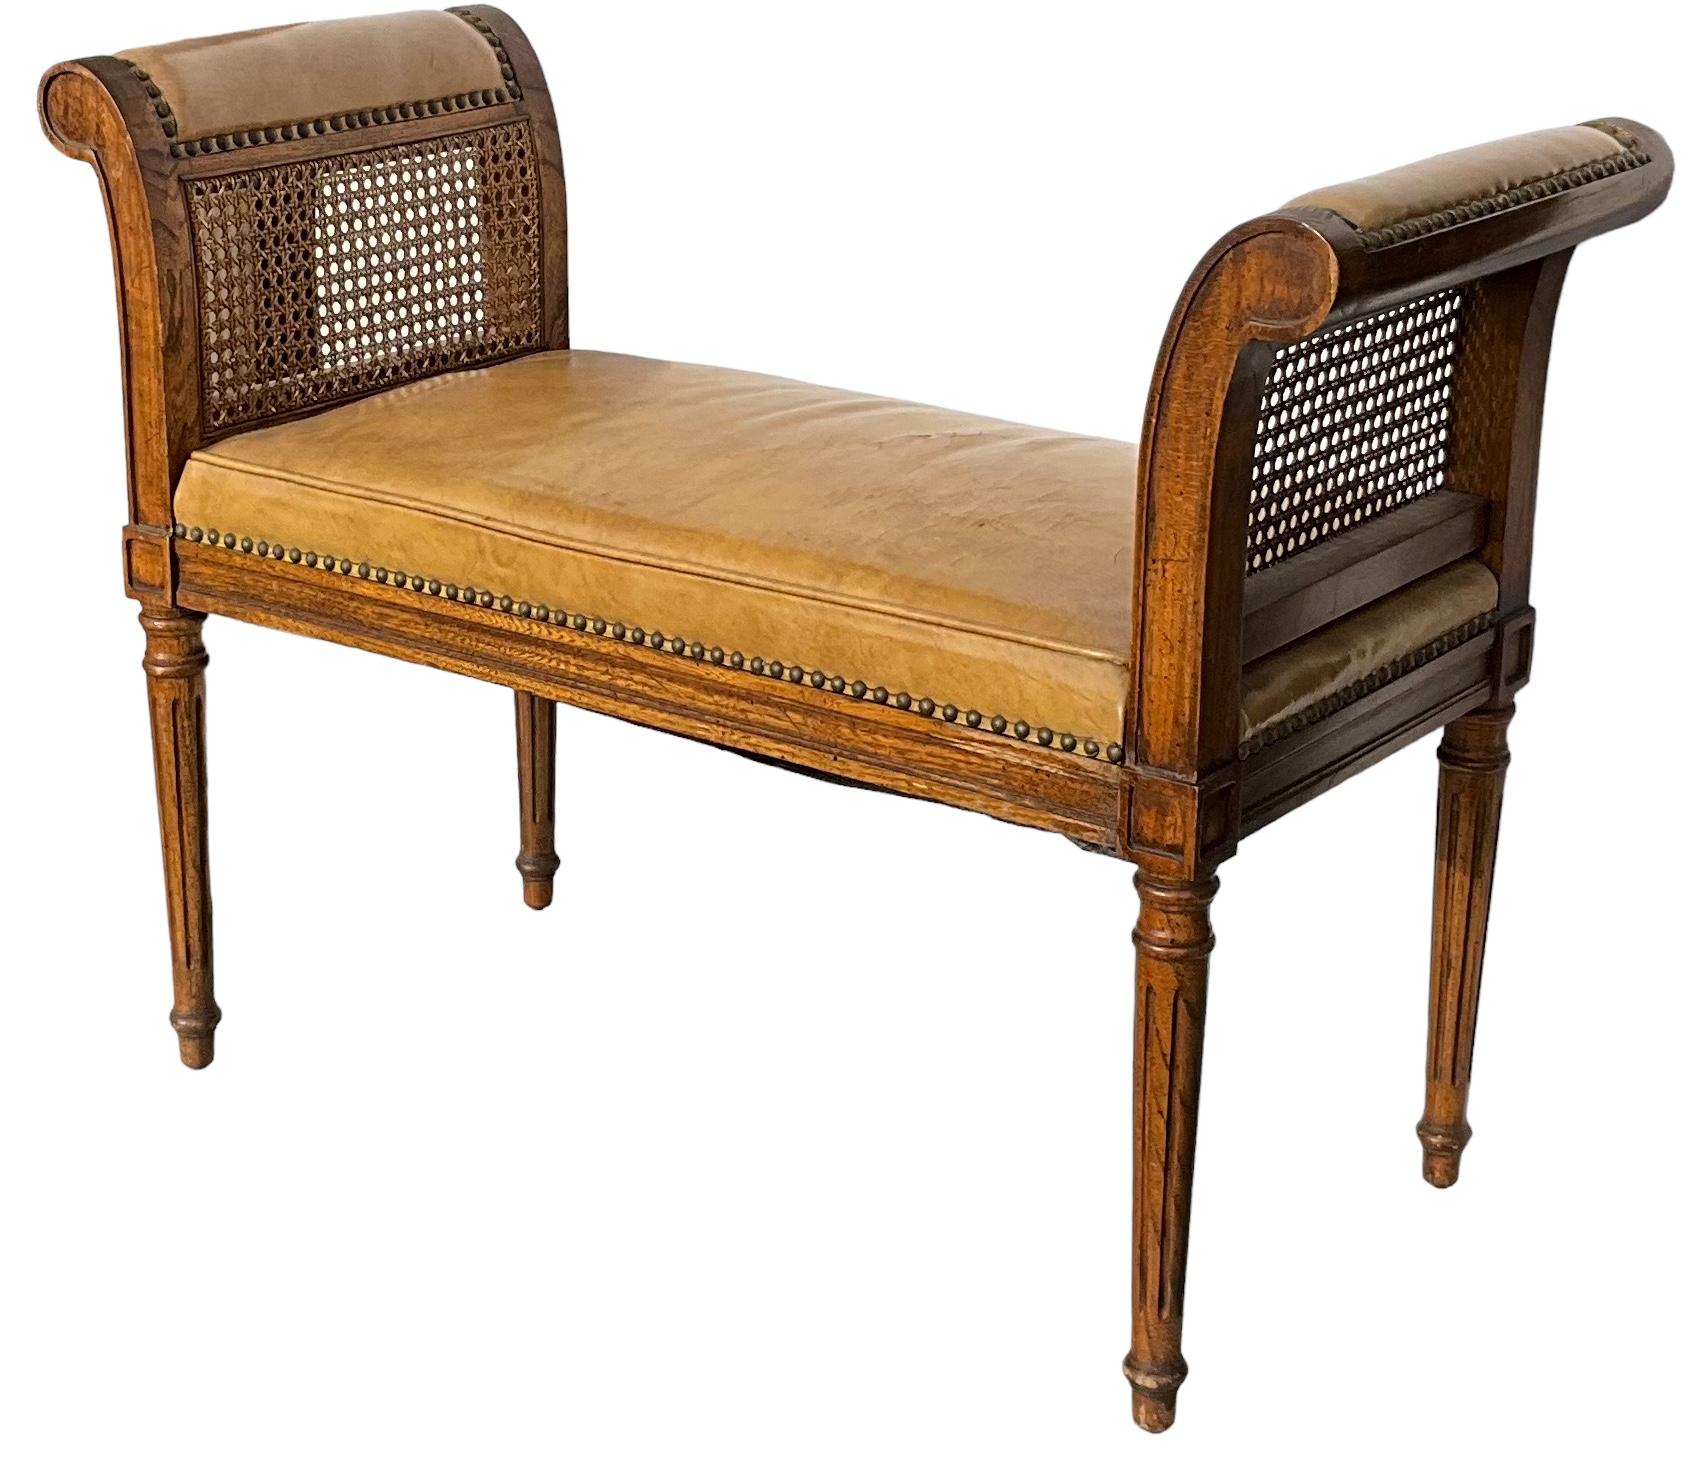 20th Century French Style Italian Walnut And Leather Bench / Ottoman With Brass Nailheads